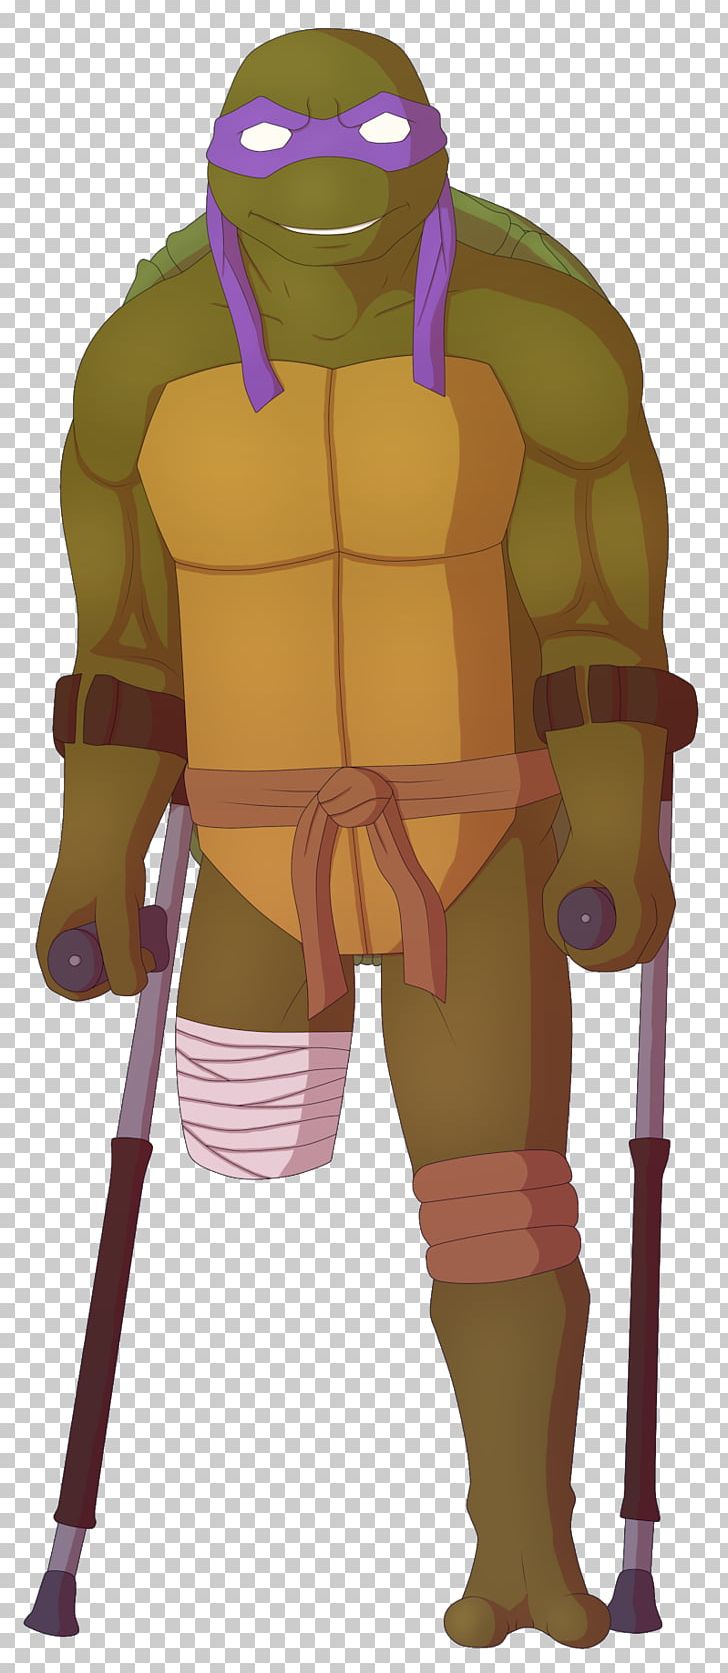 Cartoon Character Costume Fiction PNG, Clipart, Cartoon, Character, Costume, Costume Design, Donatello Free PNG Download